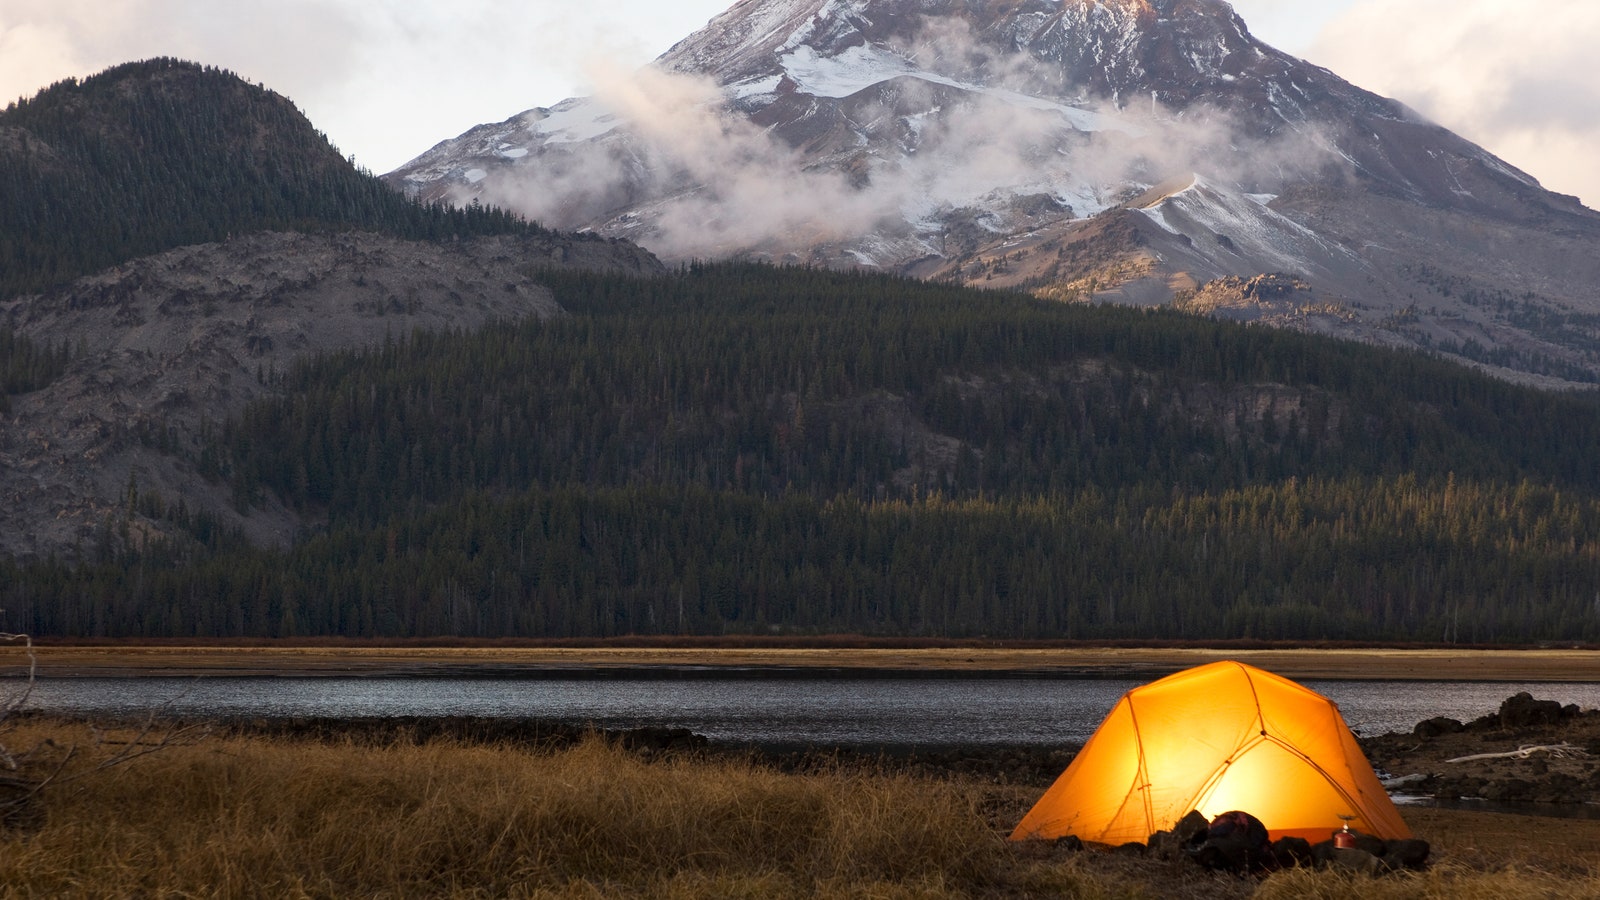 USA Oregon Bend illuminated tent by lake in mountains